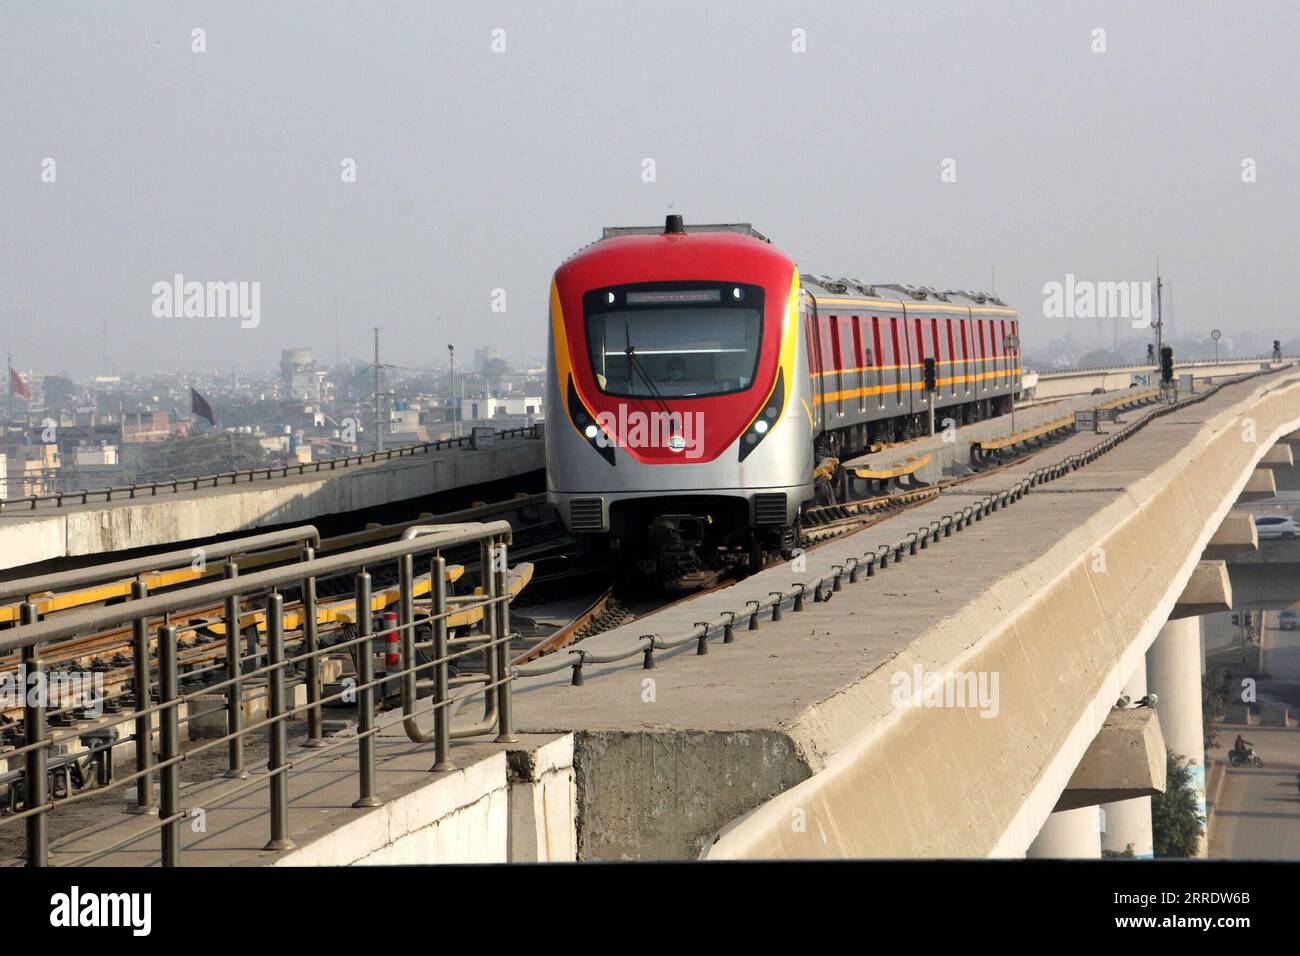 220109 -- LAHORE, Jan. 9, 2022 -- An Orange Line metro train pulls into the terminal station in Lahore, Pakistan, Dec. 29, 2021. Officially open to traffic on Oct. 25, 2020, the eco-friendly Orange Line metro train is an early project under the China-Pakistan Economic Corridor CPEC, a flagship project of the China-proposed Belt and Road Initiative. TO GO WITH Feature: Lahore Orange Line, epitome of China-Pakistan friendship Photo by /Xinhua PAKISTAN-LAHORE-B&R-CPEC-ORANGE LINE METRO TRAIN JamilxAhmed PUBLICATIONxNOTxINxCHN Stock Photo